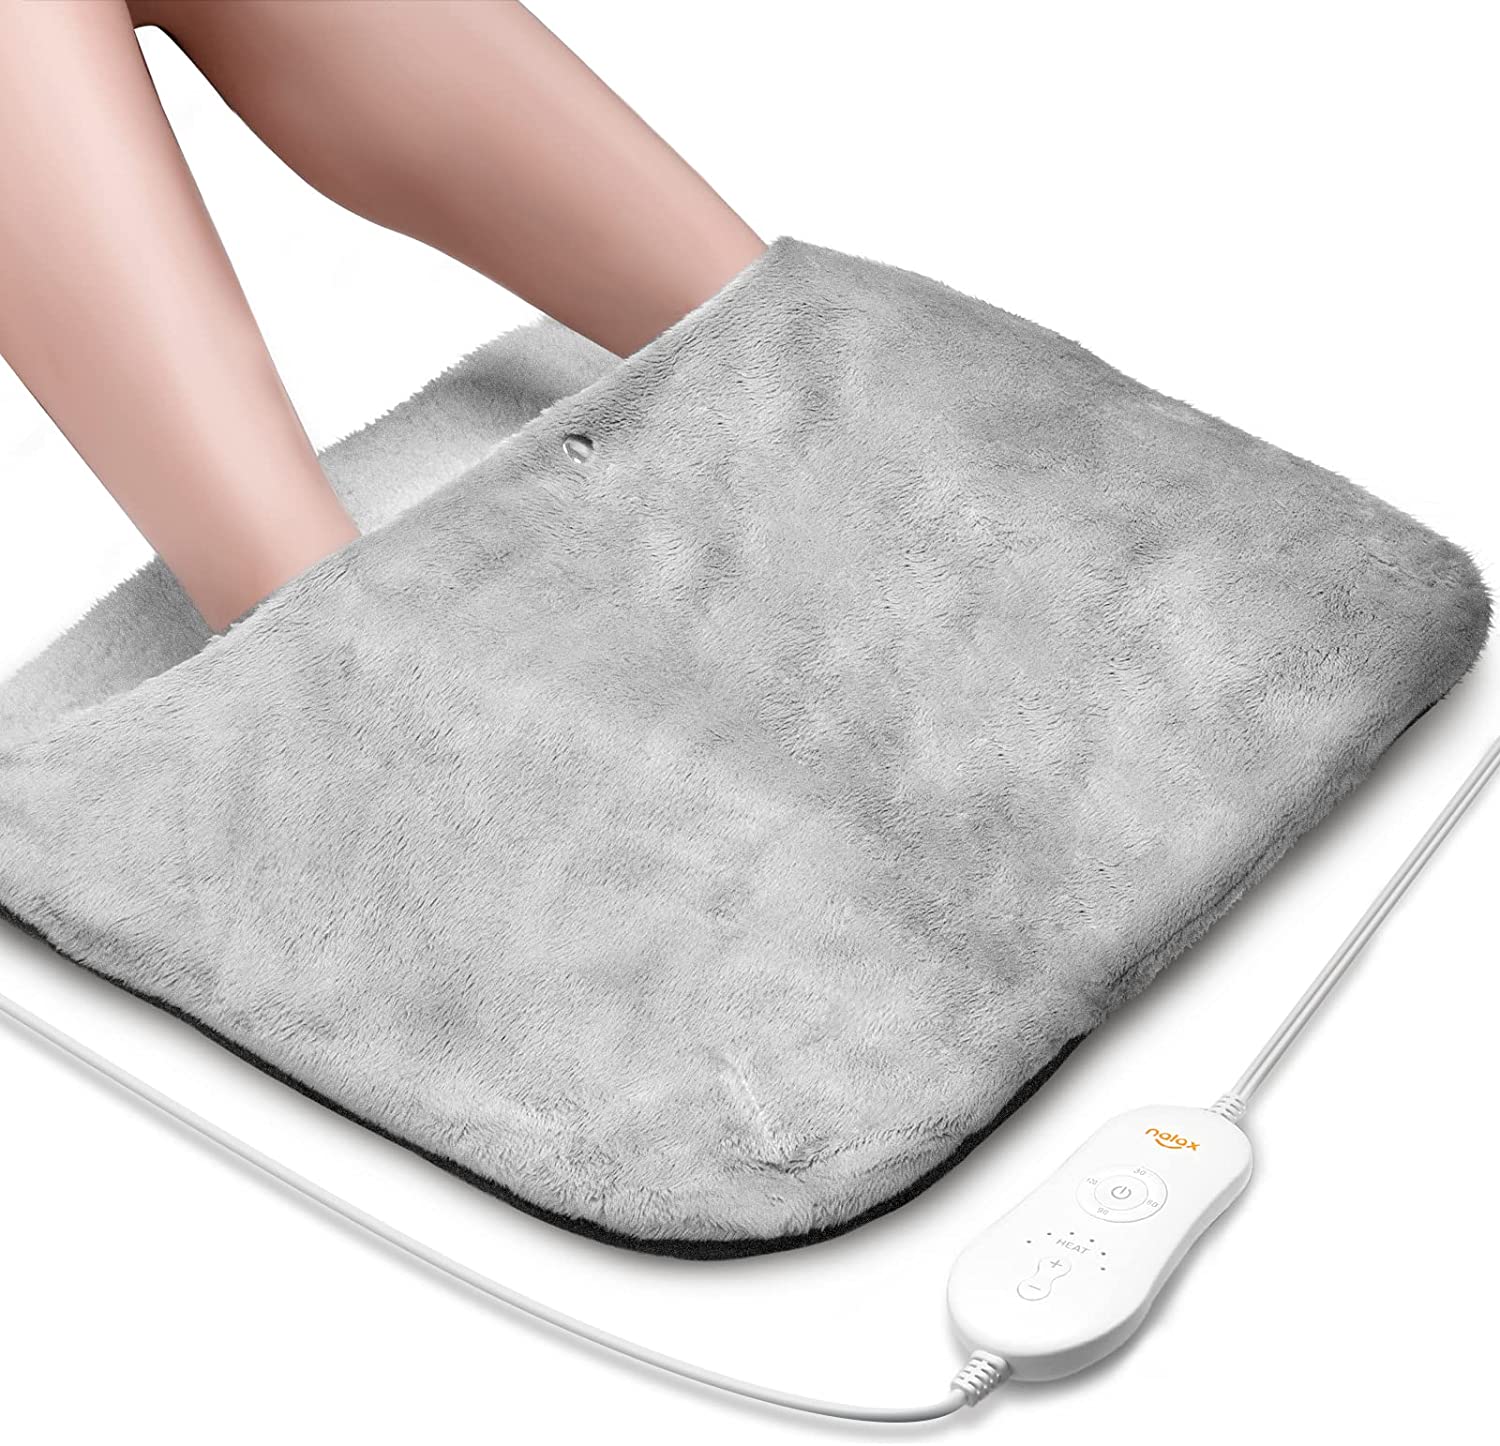 Best far Infrared Heating Pads Reviews in 2021 1